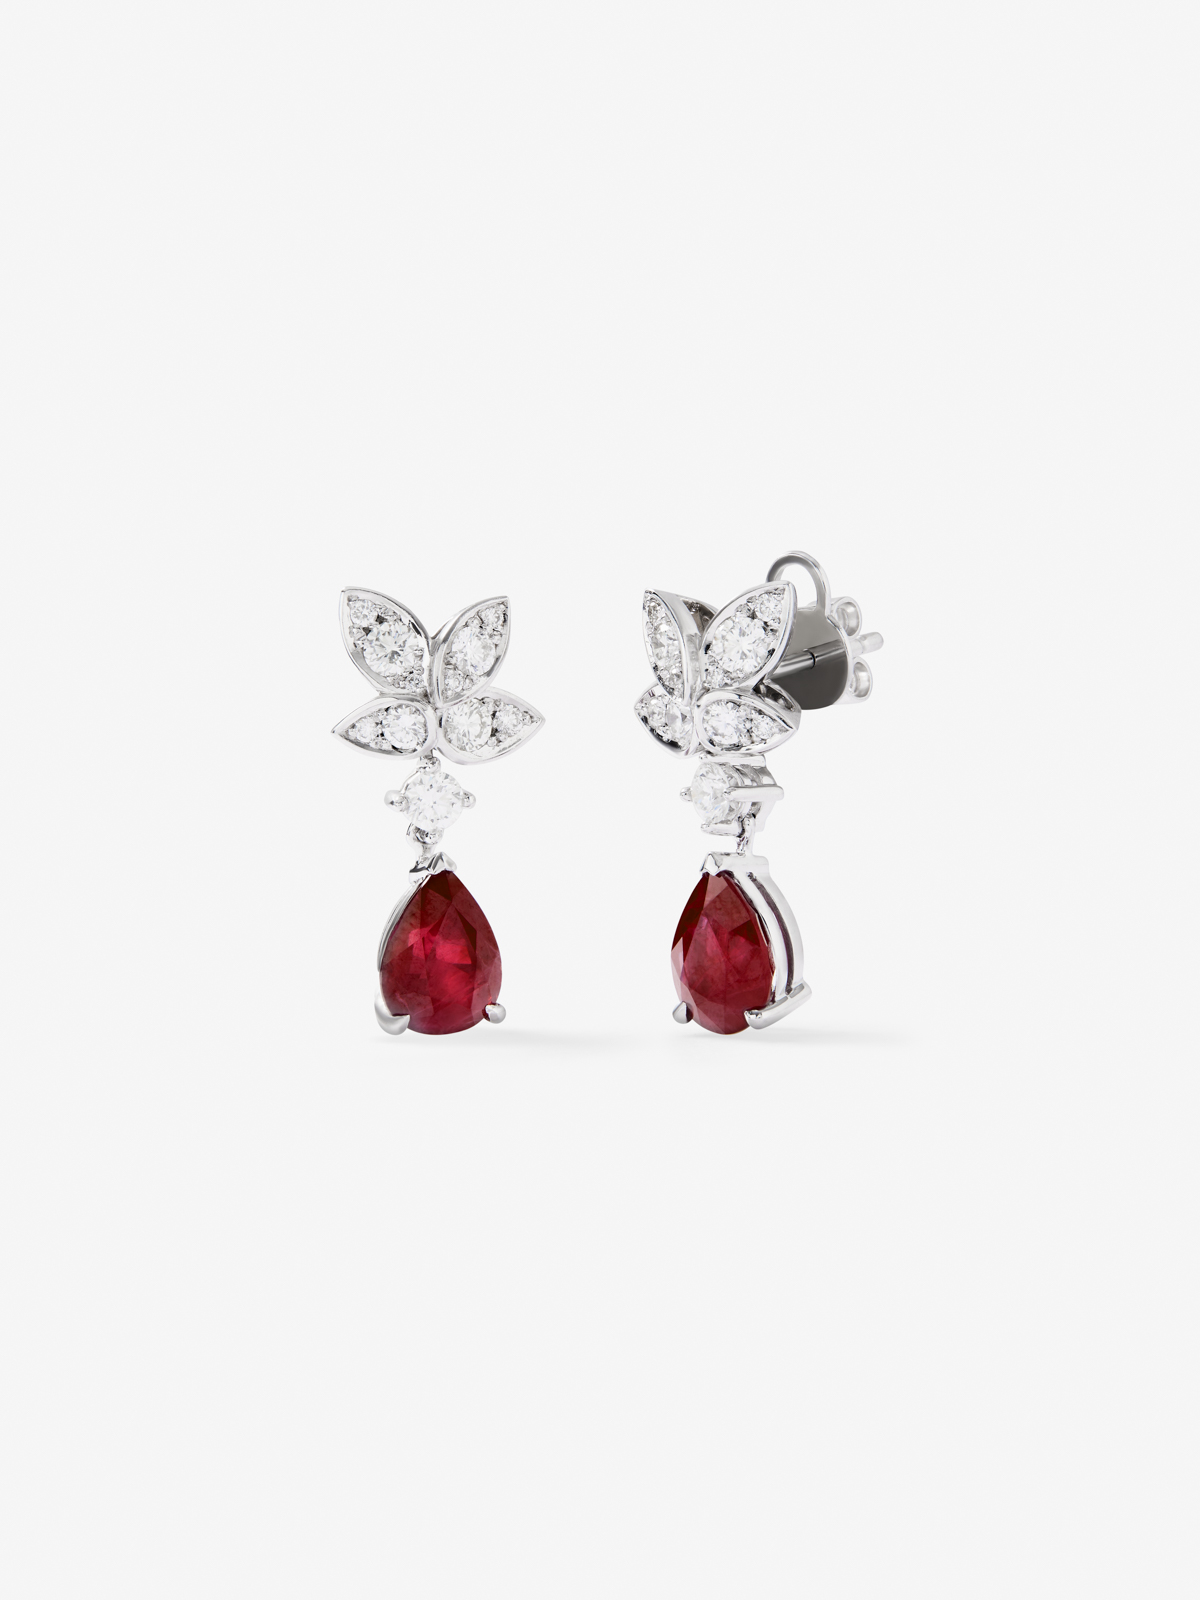 18K white gold earrings with red rubies Pigeon Blod in pear size of 3.94 cts and white diamonds in bright size of 0.88 cts